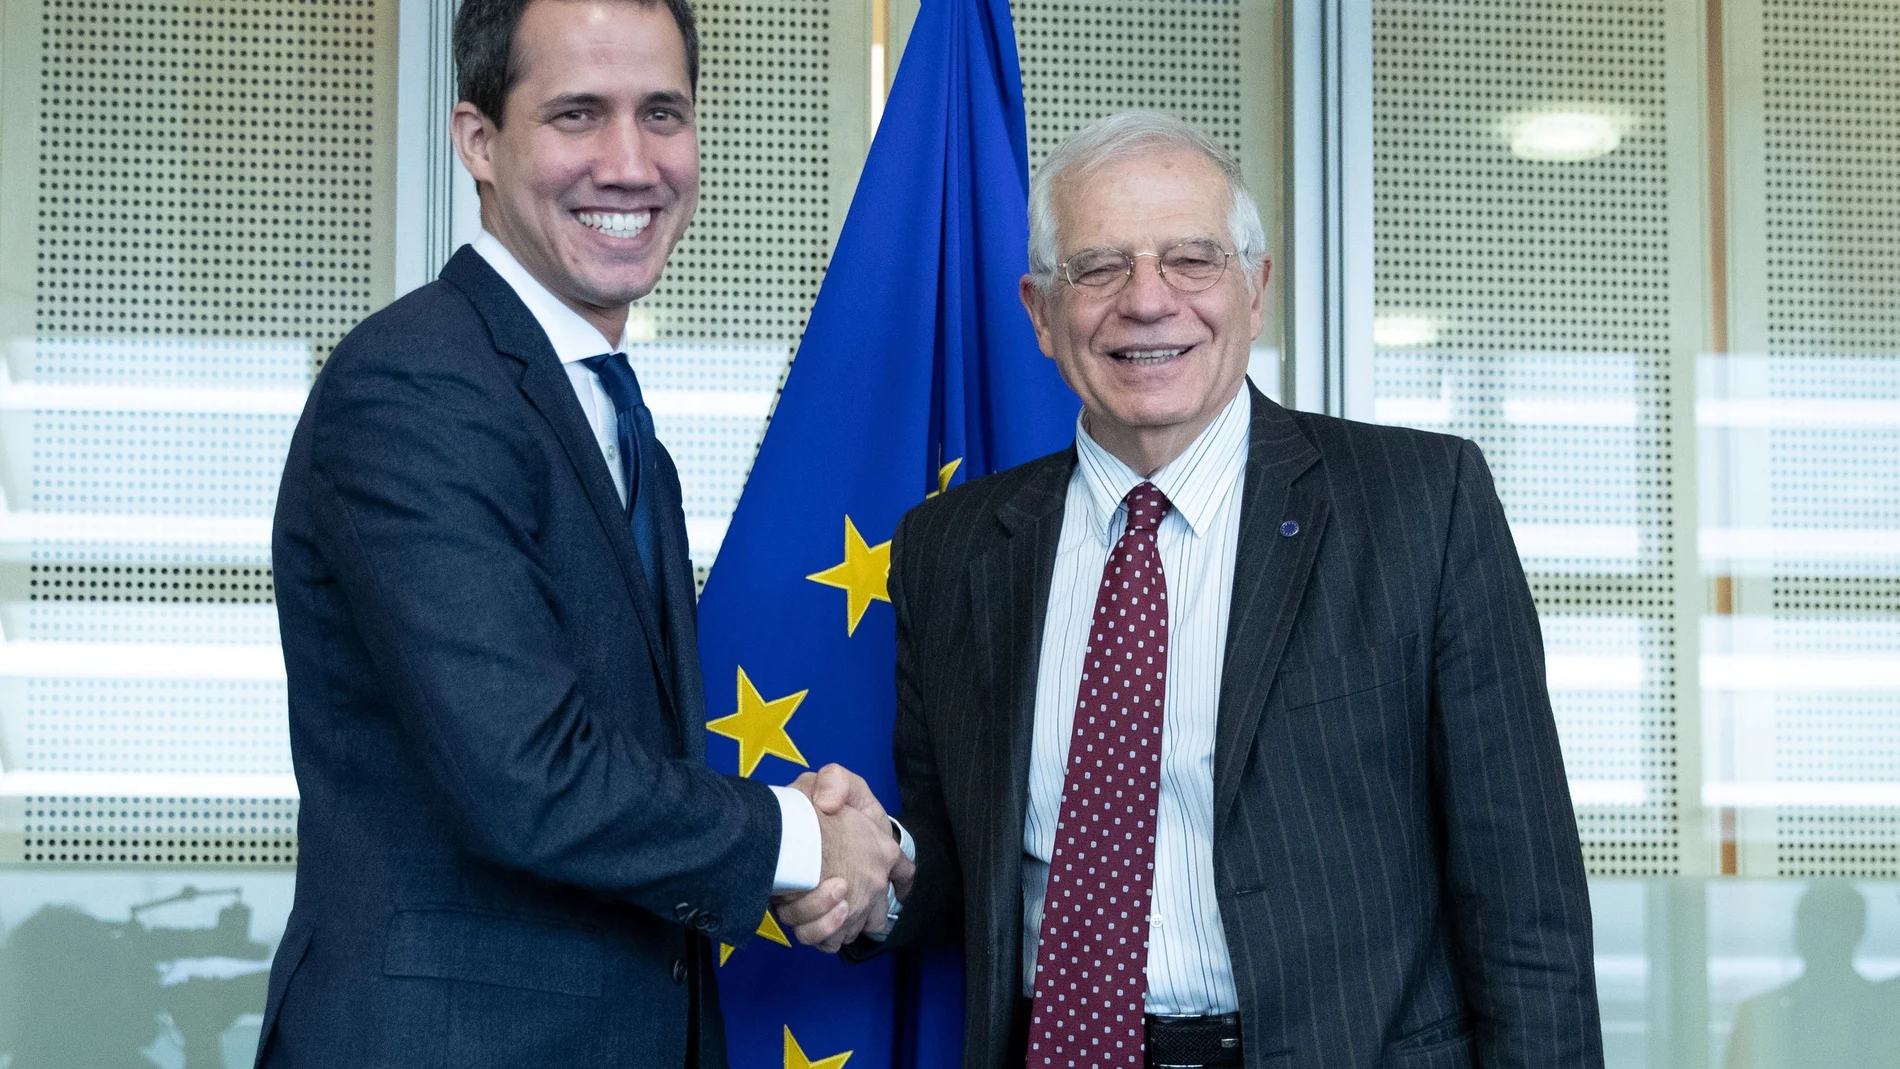 Venezuelan opposition leader Juan Guaido meets with the European Union's High Representative for foreign policy Josep Borrell in Brussels